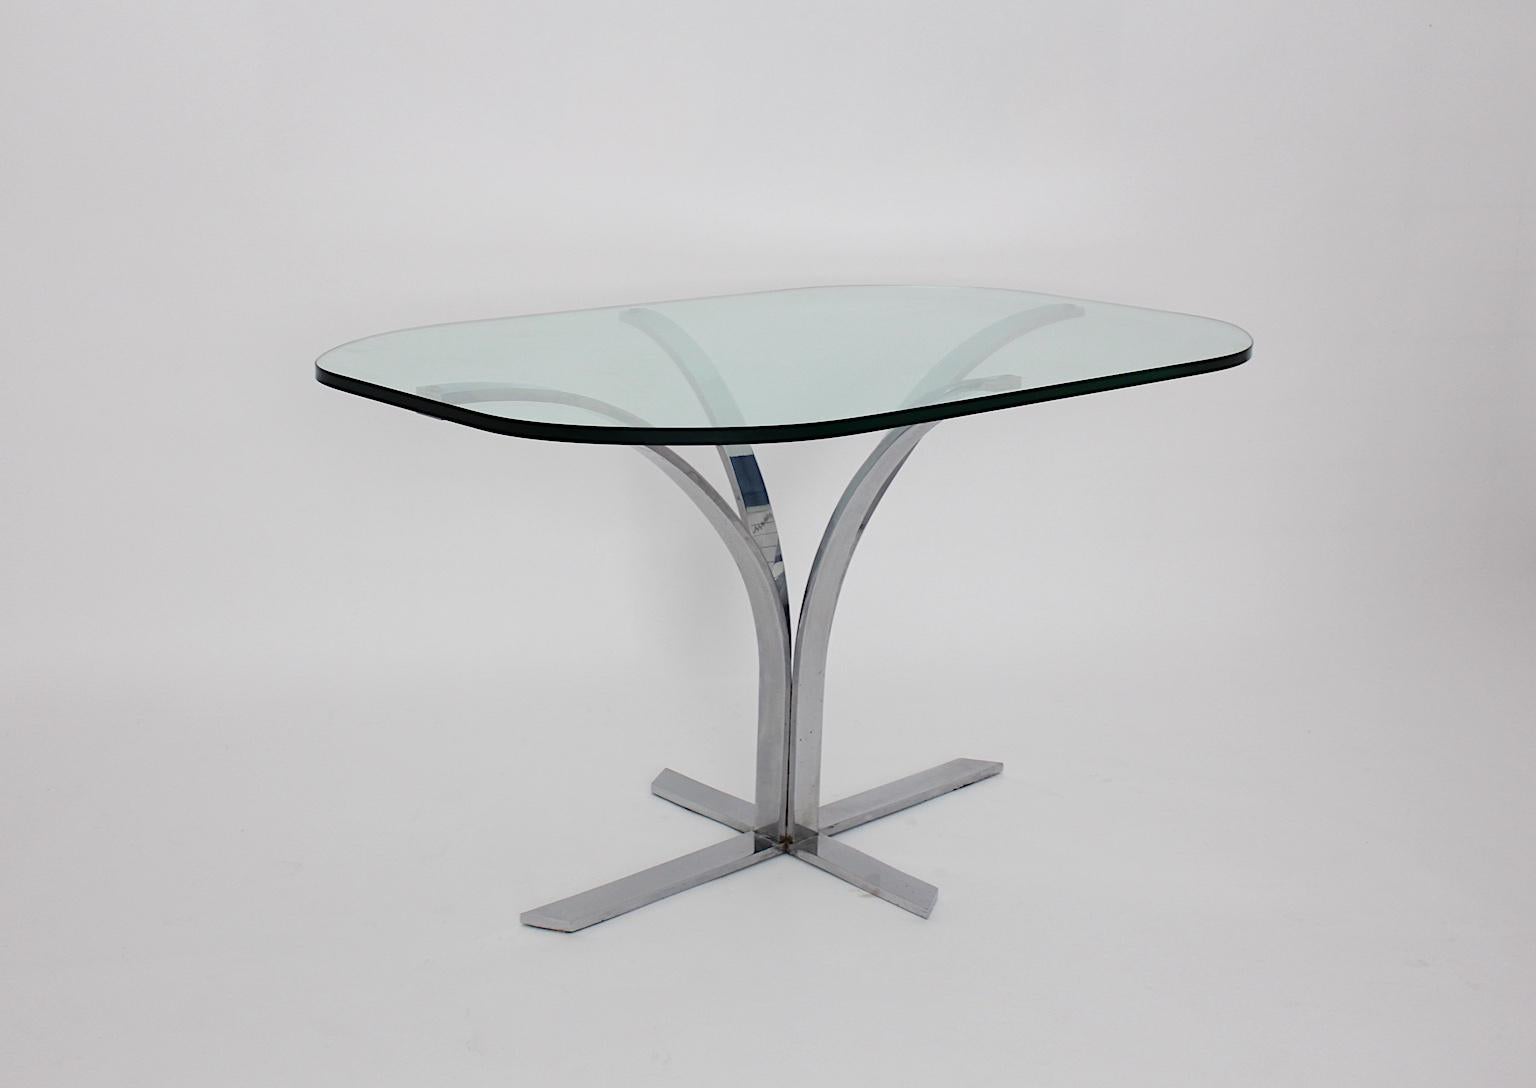 Space Age Chromed Metal Vintage Dining Table or Writing Table, 1960s, Germany In Good Condition For Sale In Vienna, AT